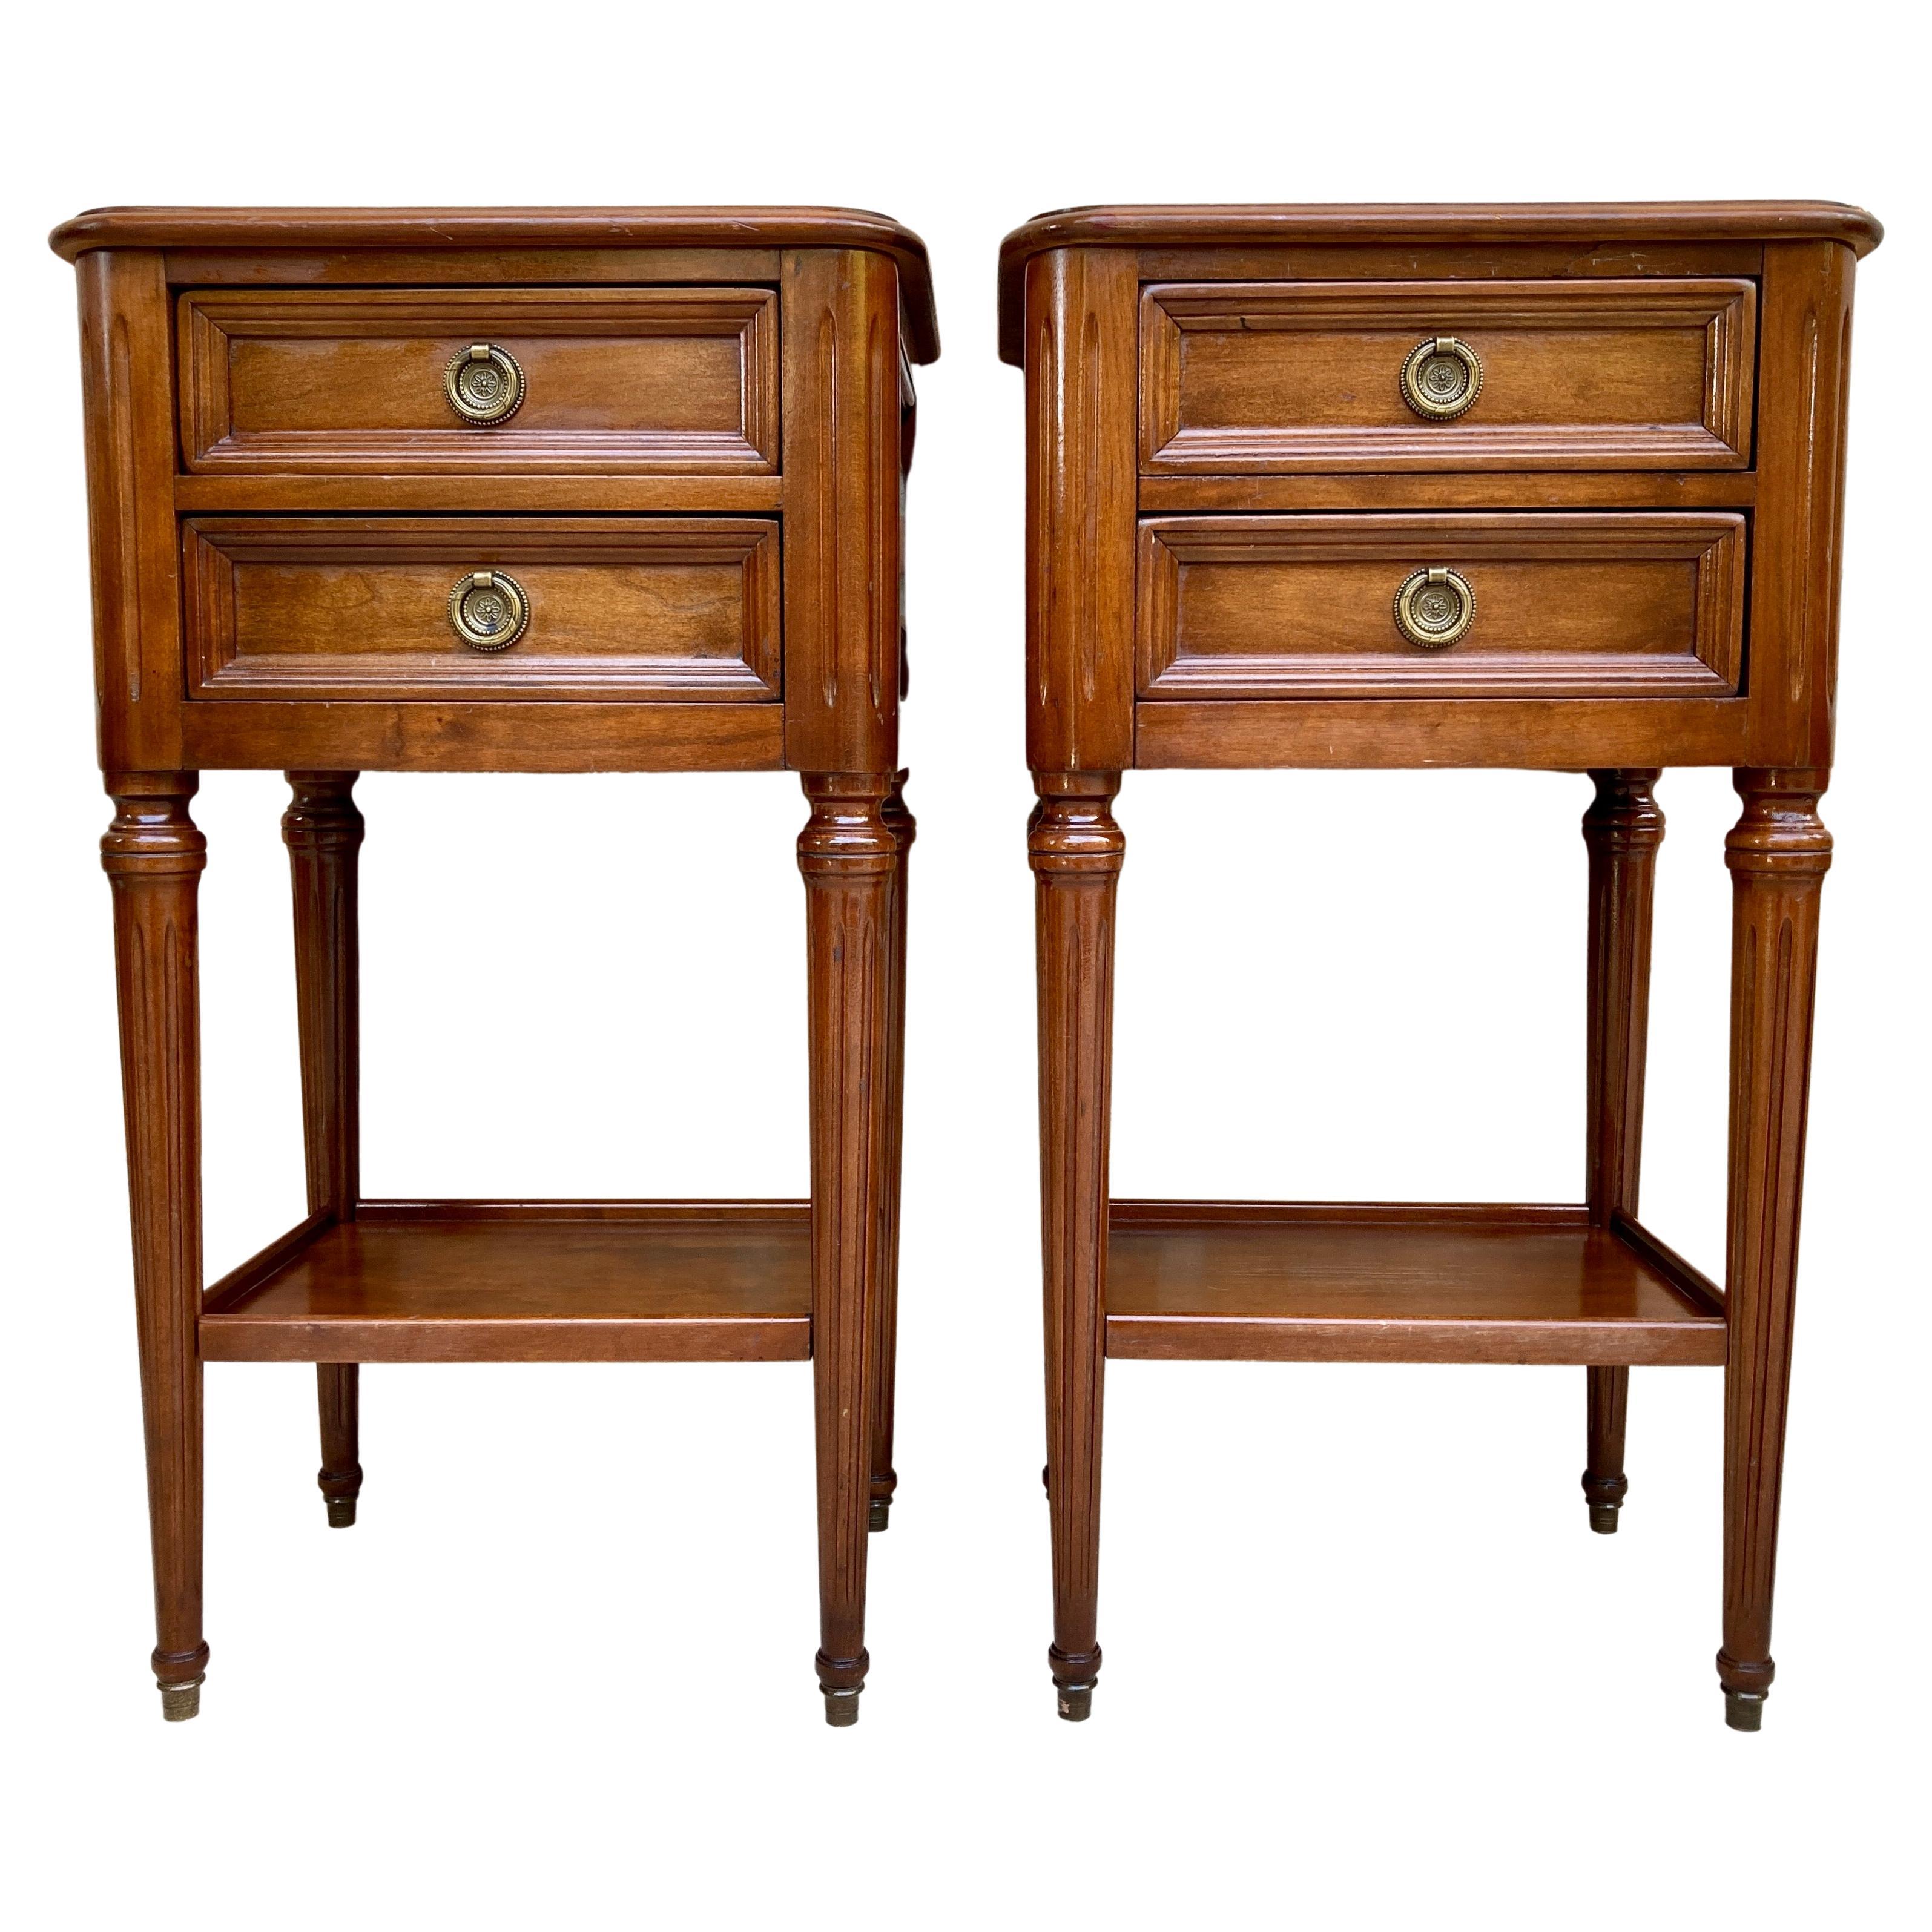 Pair of Mid-Century French Walnut Nightstands with Two Drawers and One Low Shelf